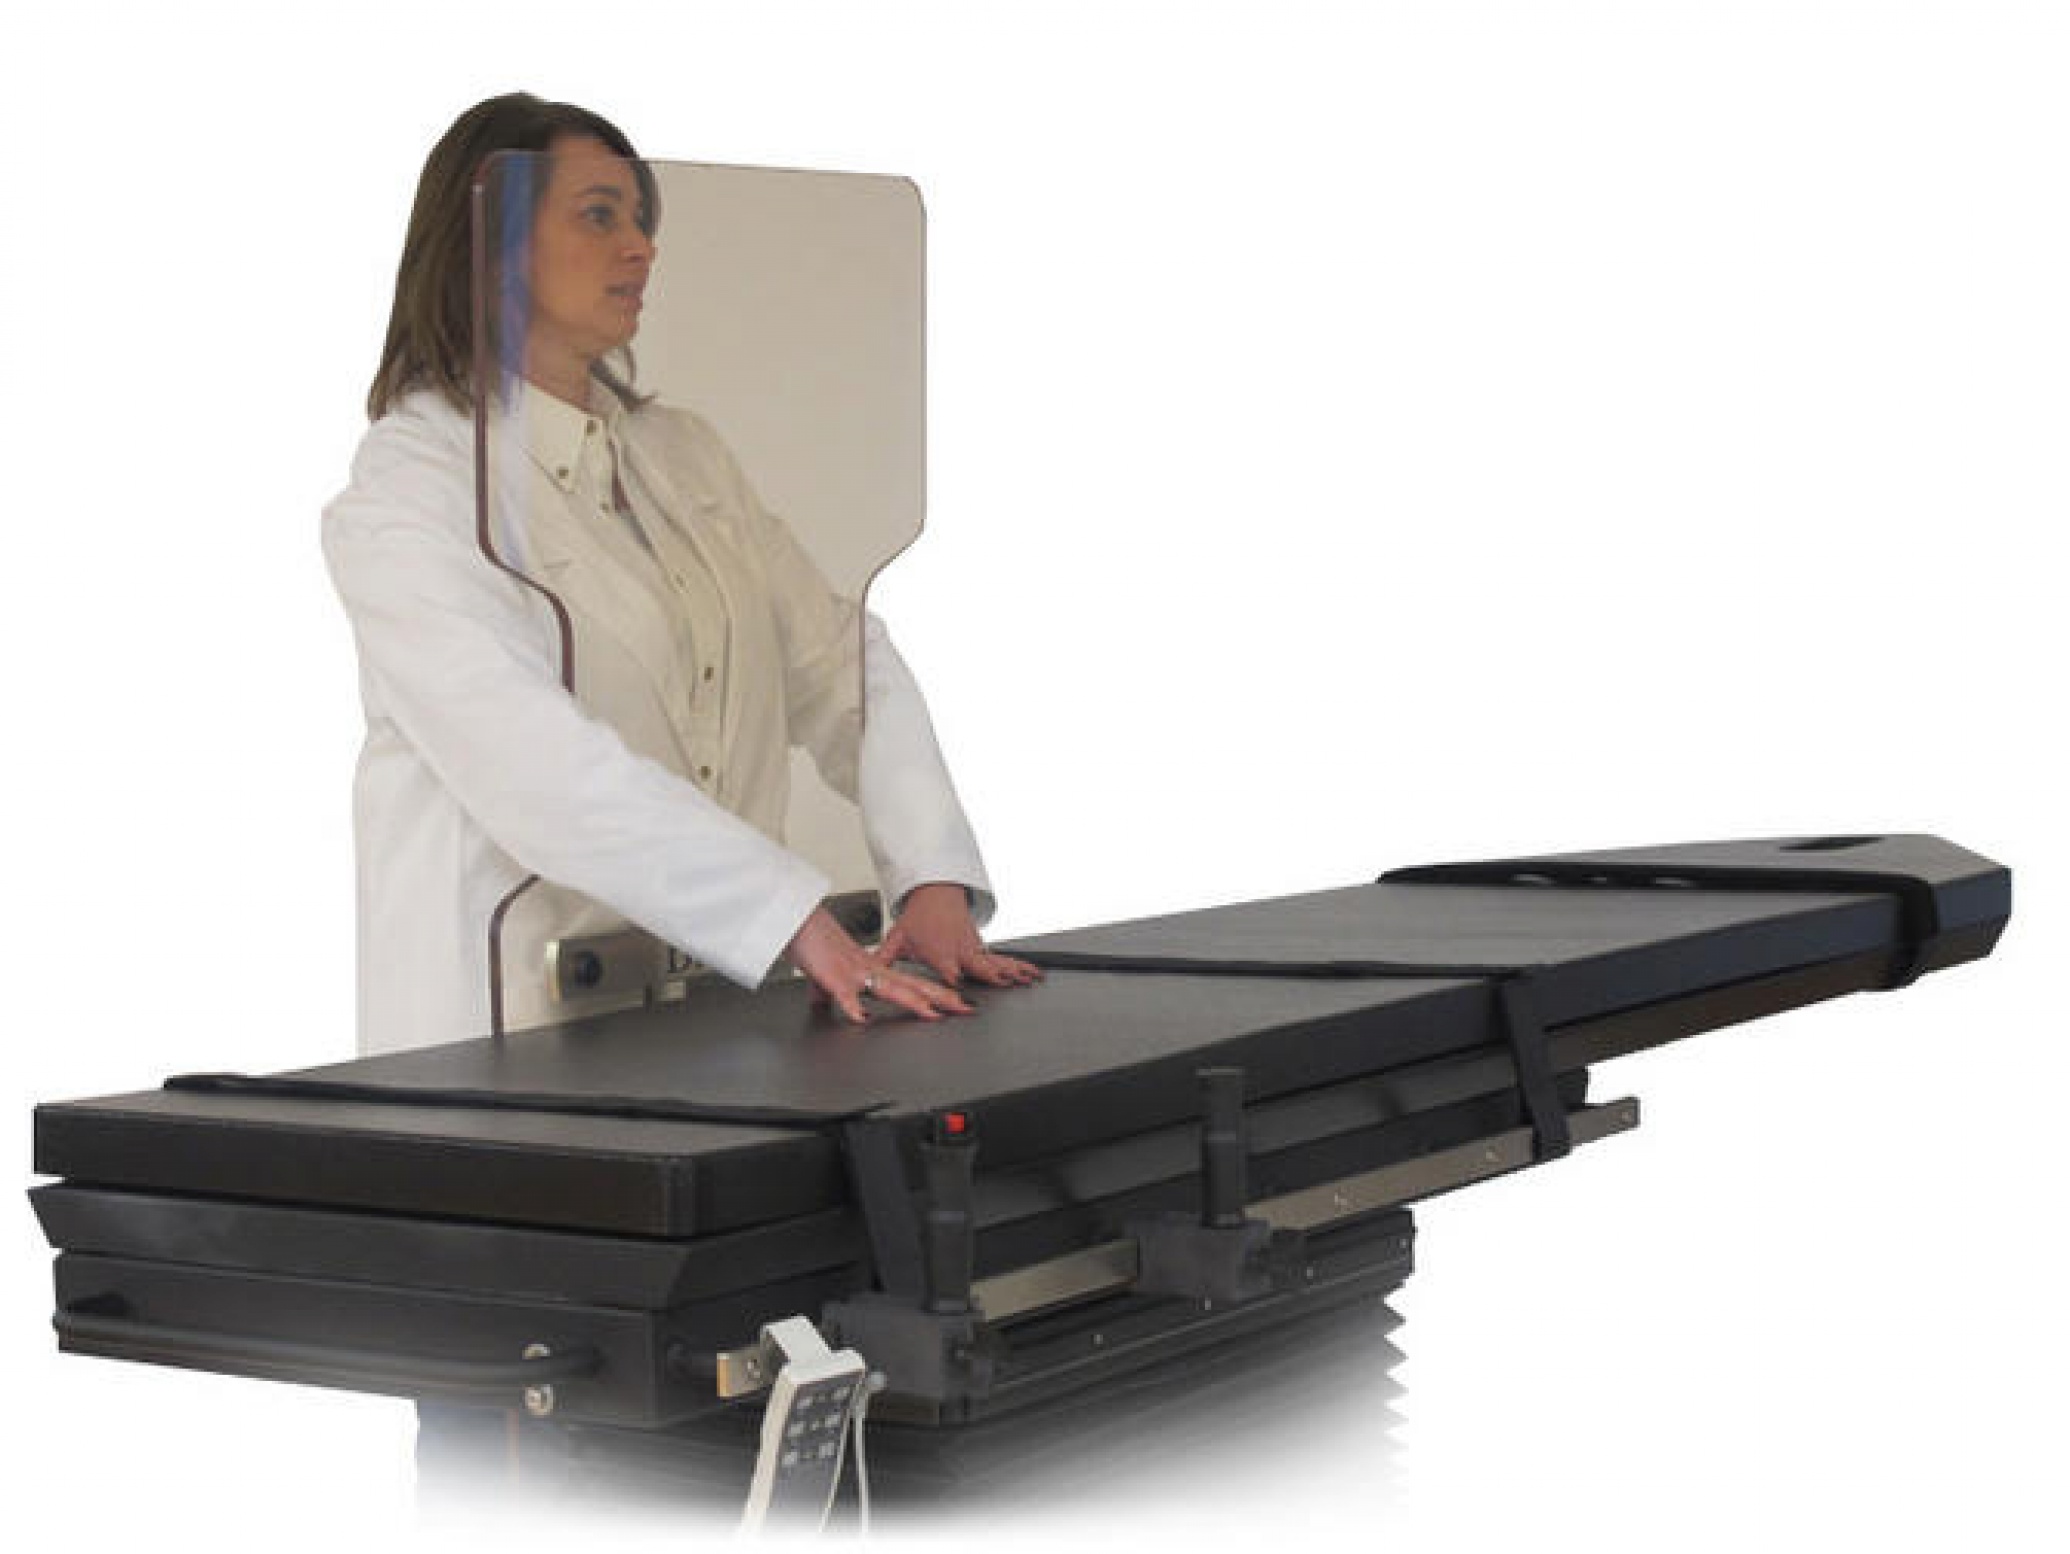 The Biodex C-Arm 840 table and Clear-Lead Personal Mobile Barrier